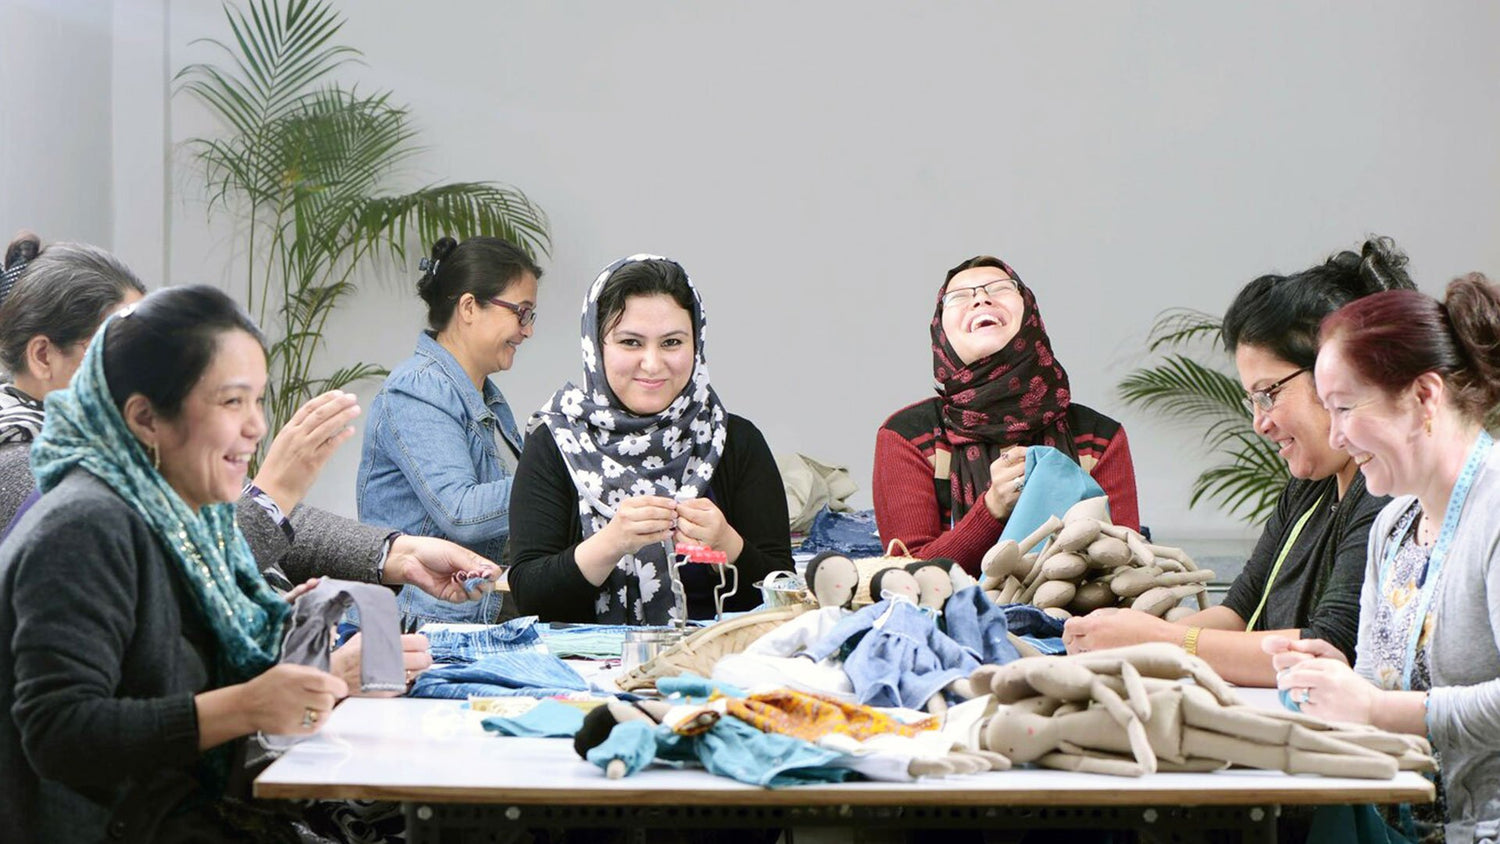 Group of Afghan refugees making rag dolls and smiling.